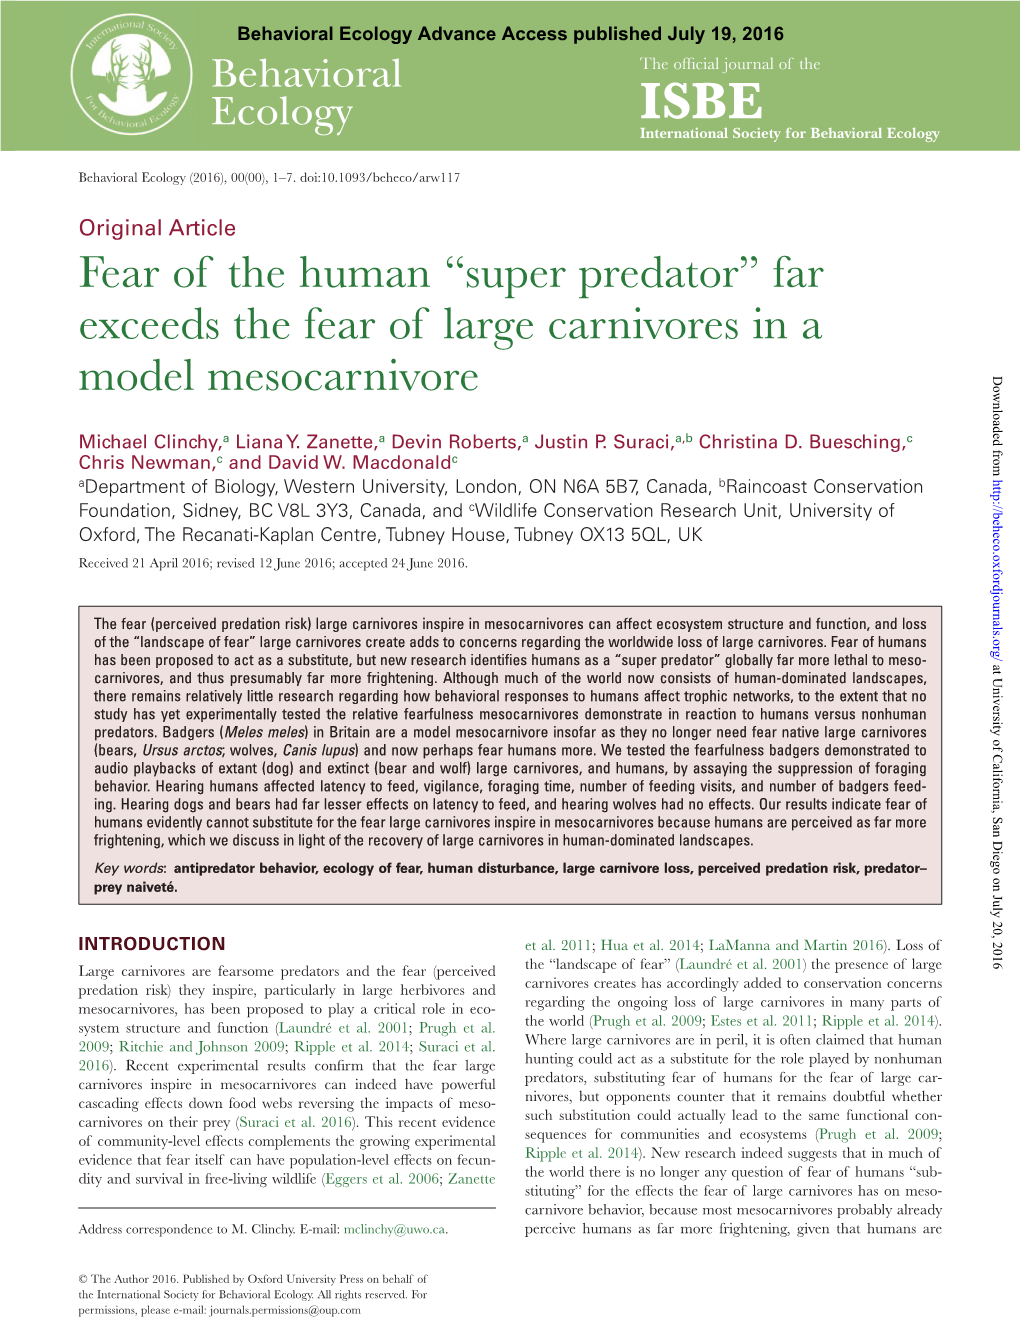 Far Exceeds the Fear of Large Carnivores in a Model Mesocarnivore Downloaded From